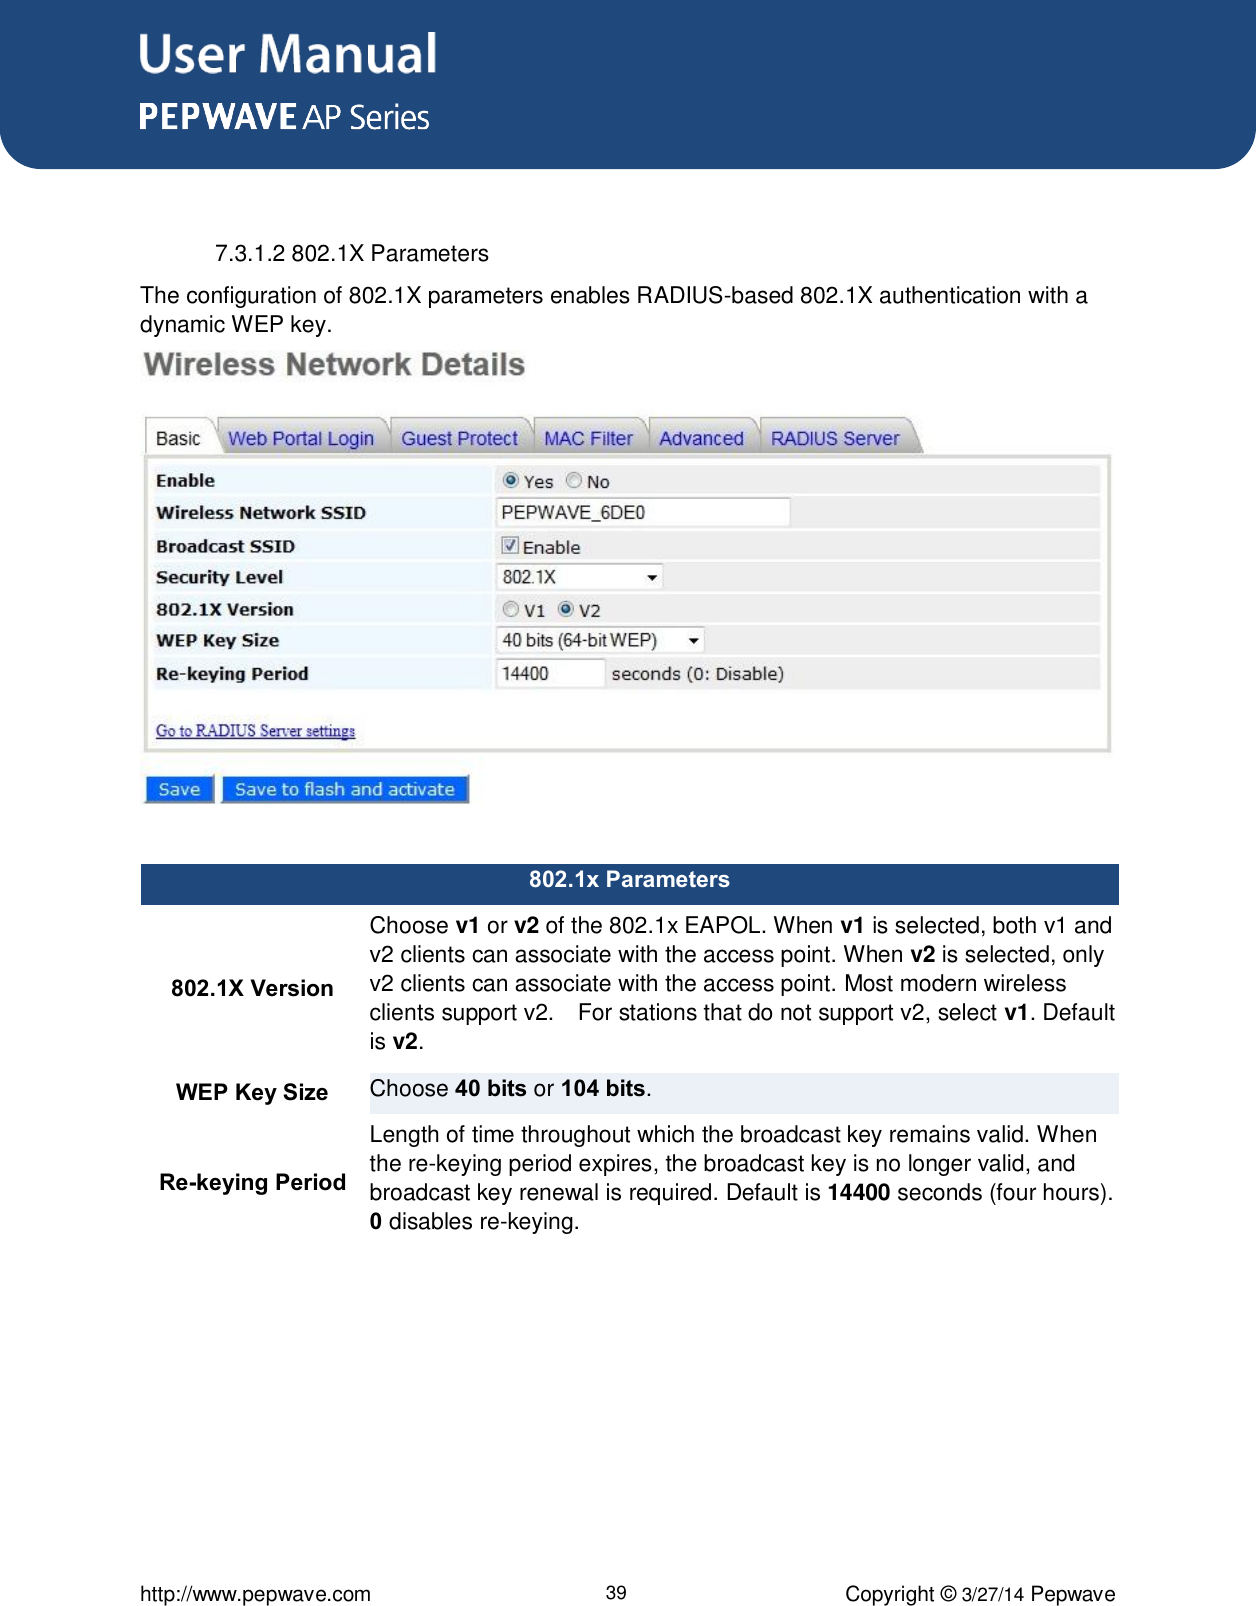 User Manual      http://www.pepwave.com 39 Copyright ©  3/27/14 Pepwave   7.3.1.2 802.1X Parameters The configuration of 802.1X parameters enables RADIUS-based 802.1X authentication with a dynamic WEP key.     802.1x Parameters 802.1X Version Choose v1 or v2 of the 802.1x EAPOL. When v1 is selected, both v1 and v2 clients can associate with the access point. When v2 is selected, only v2 clients can associate with the access point. Most modern wireless clients support v2.    For stations that do not support v2, select v1. Default is v2. WEP Key Size Choose 40 bits or 104 bits. Re-keying Period Length of time throughout which the broadcast key remains valid. When the re-keying period expires, the broadcast key is no longer valid, and broadcast key renewal is required. Default is 14400 seconds (four hours). 0 disables re-keying.   